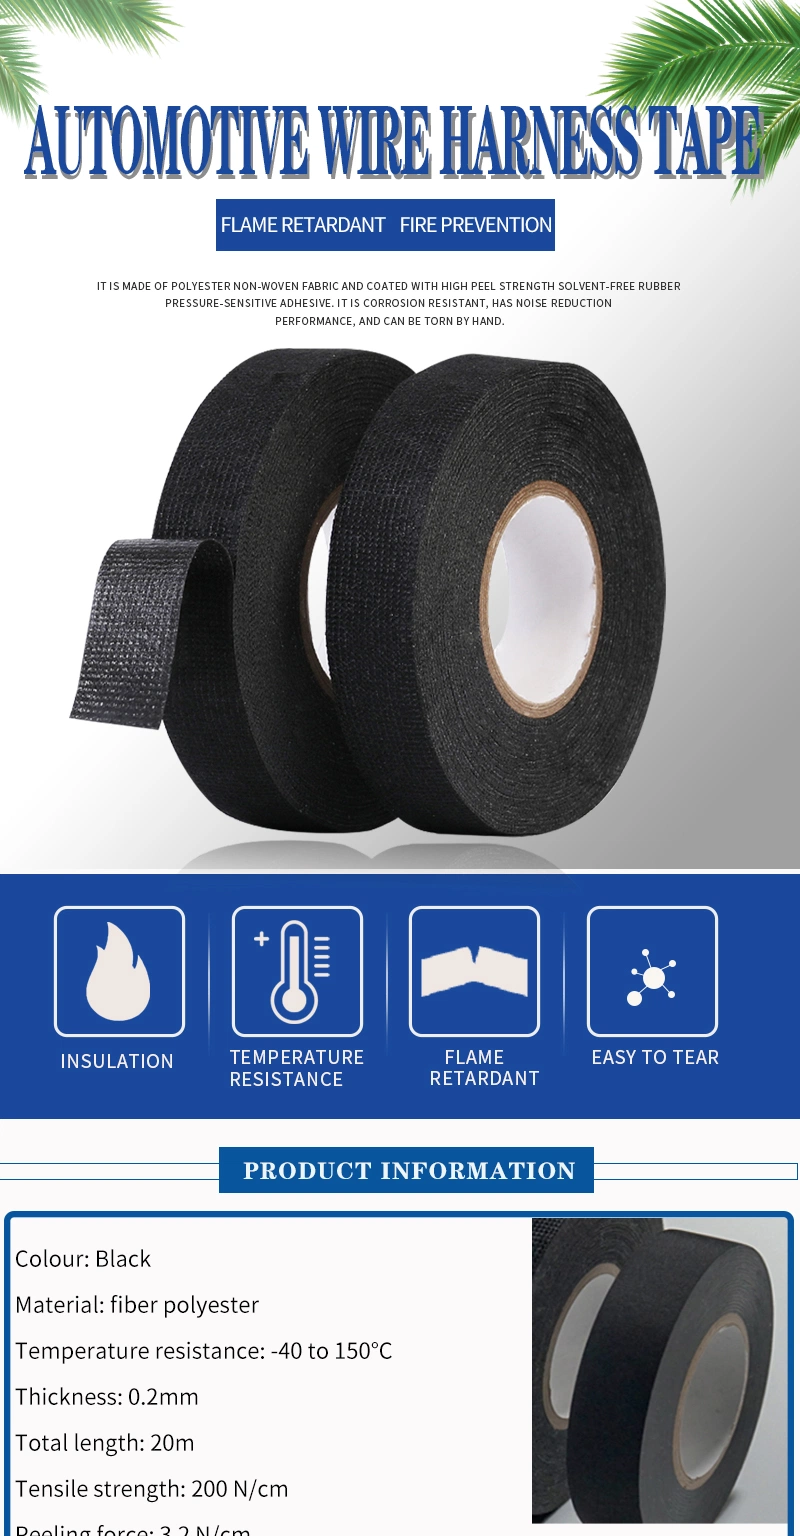 Easy Tear Black Fabric Cloth PVC Fuzzy Electrical Insulation Packaging Auto Car Automotive Interior Wire Harness Flannel